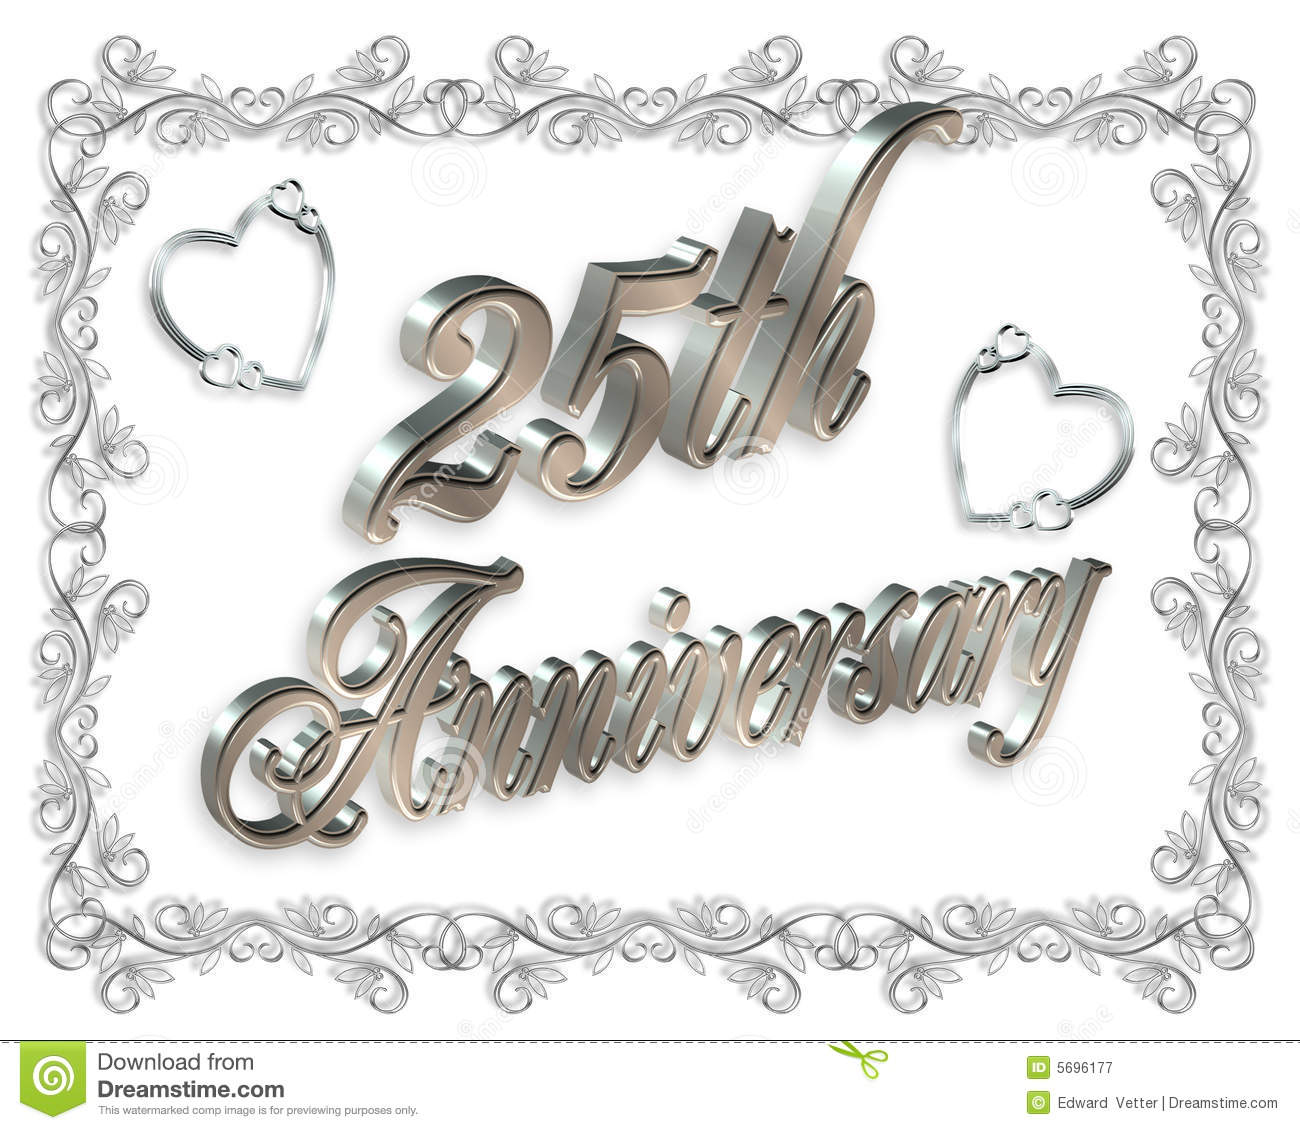 25th Wedding Anniversary Royalty Free Stock Photography   Image    